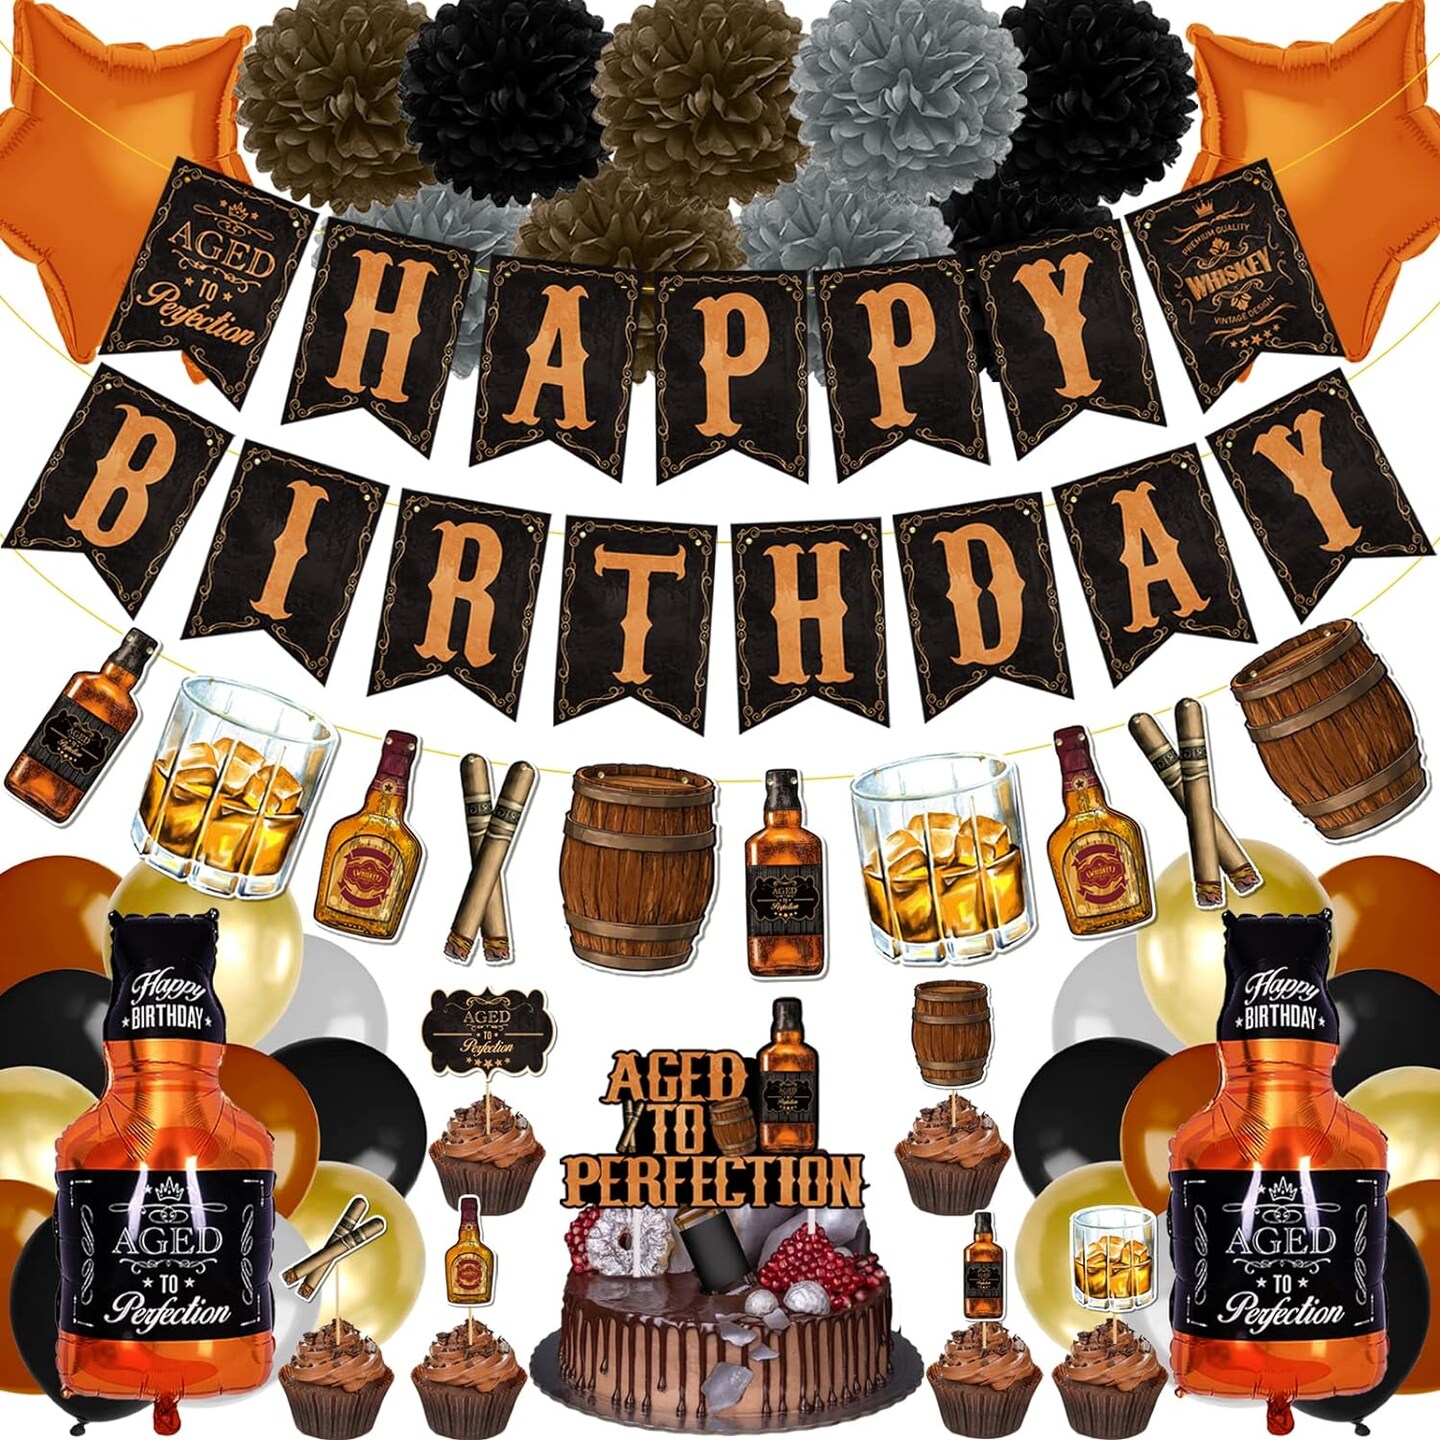 Whiskey Birthday Party Decorations for Men, Aged to Perfection Party Supplies including Whiskey Birthday Banner, Cake Toppers, Whiskey Foil Balloons, Tissue Paper Flowers (brown)